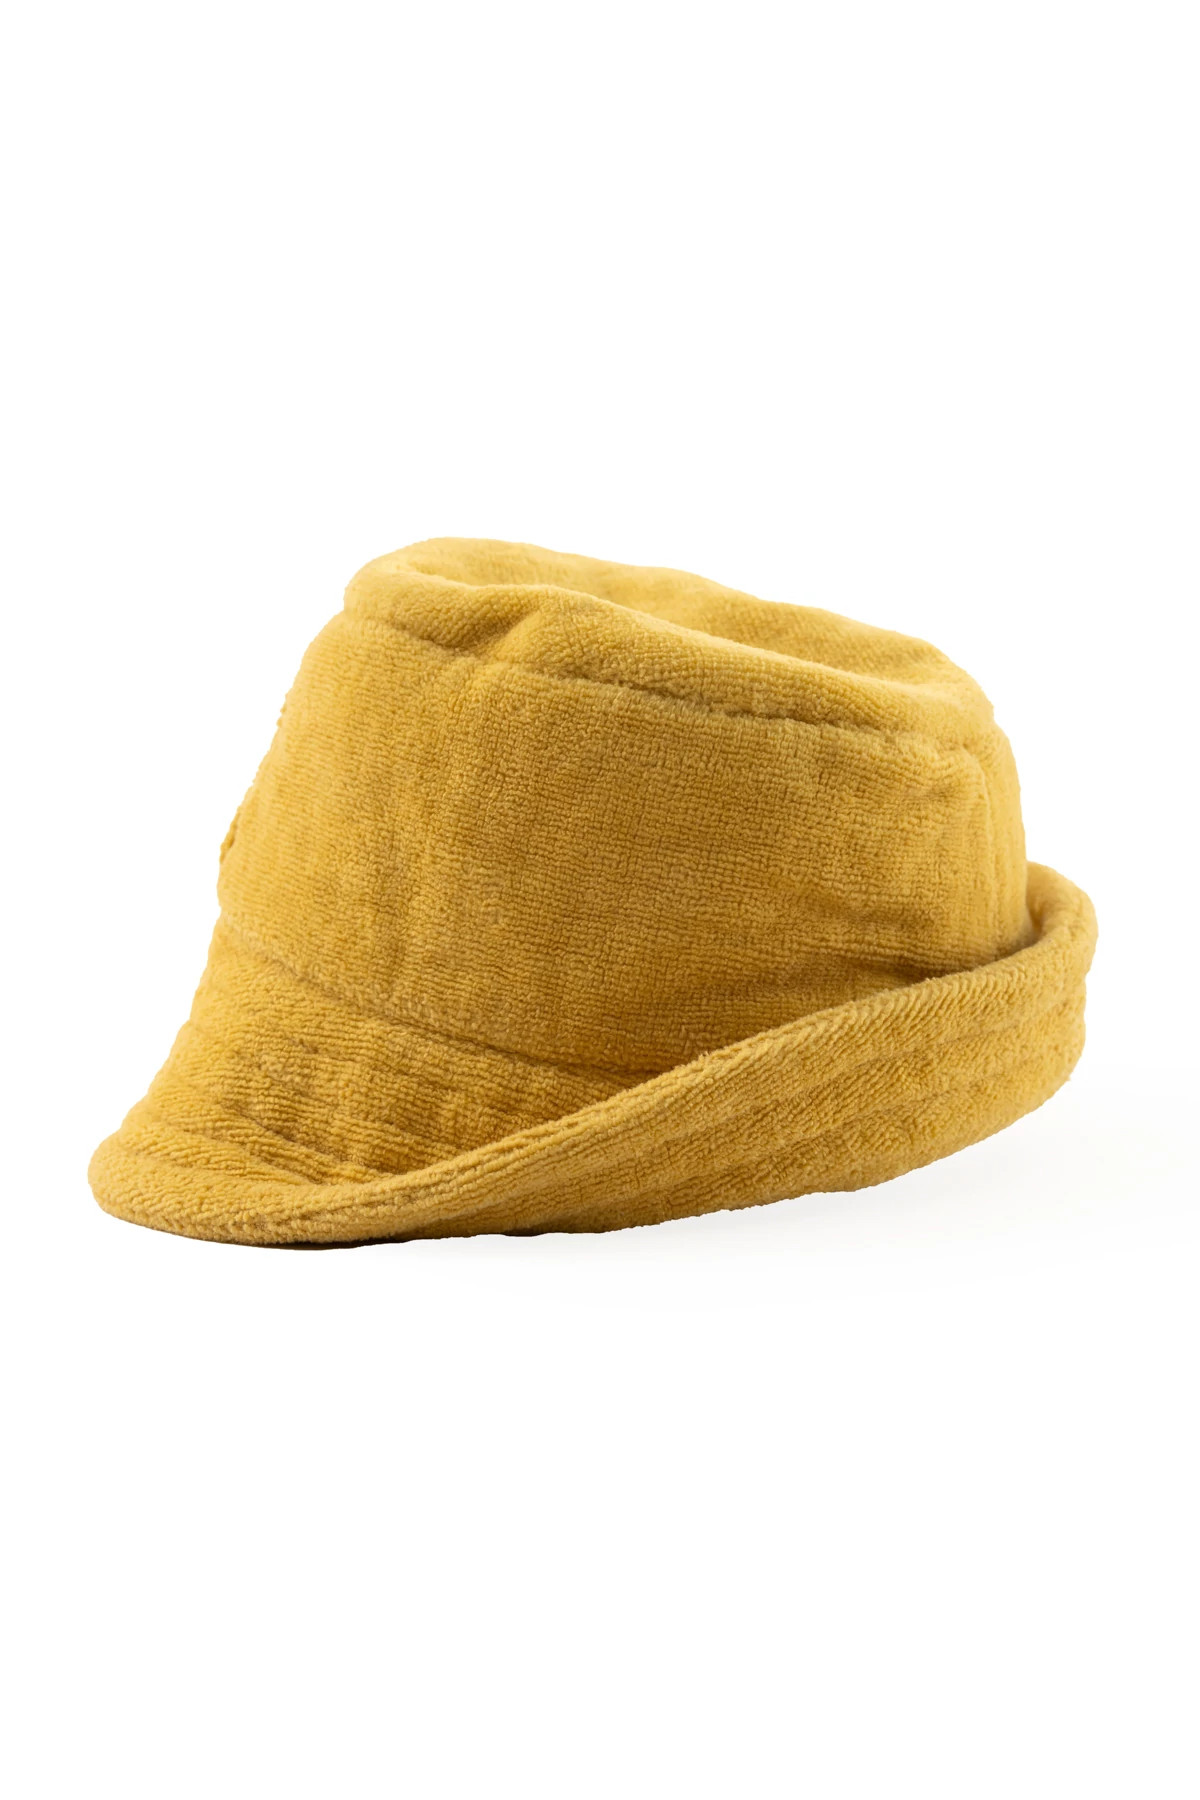 VINTAGE GOLD Terry Toweling Bucket Hat S/M image number 2